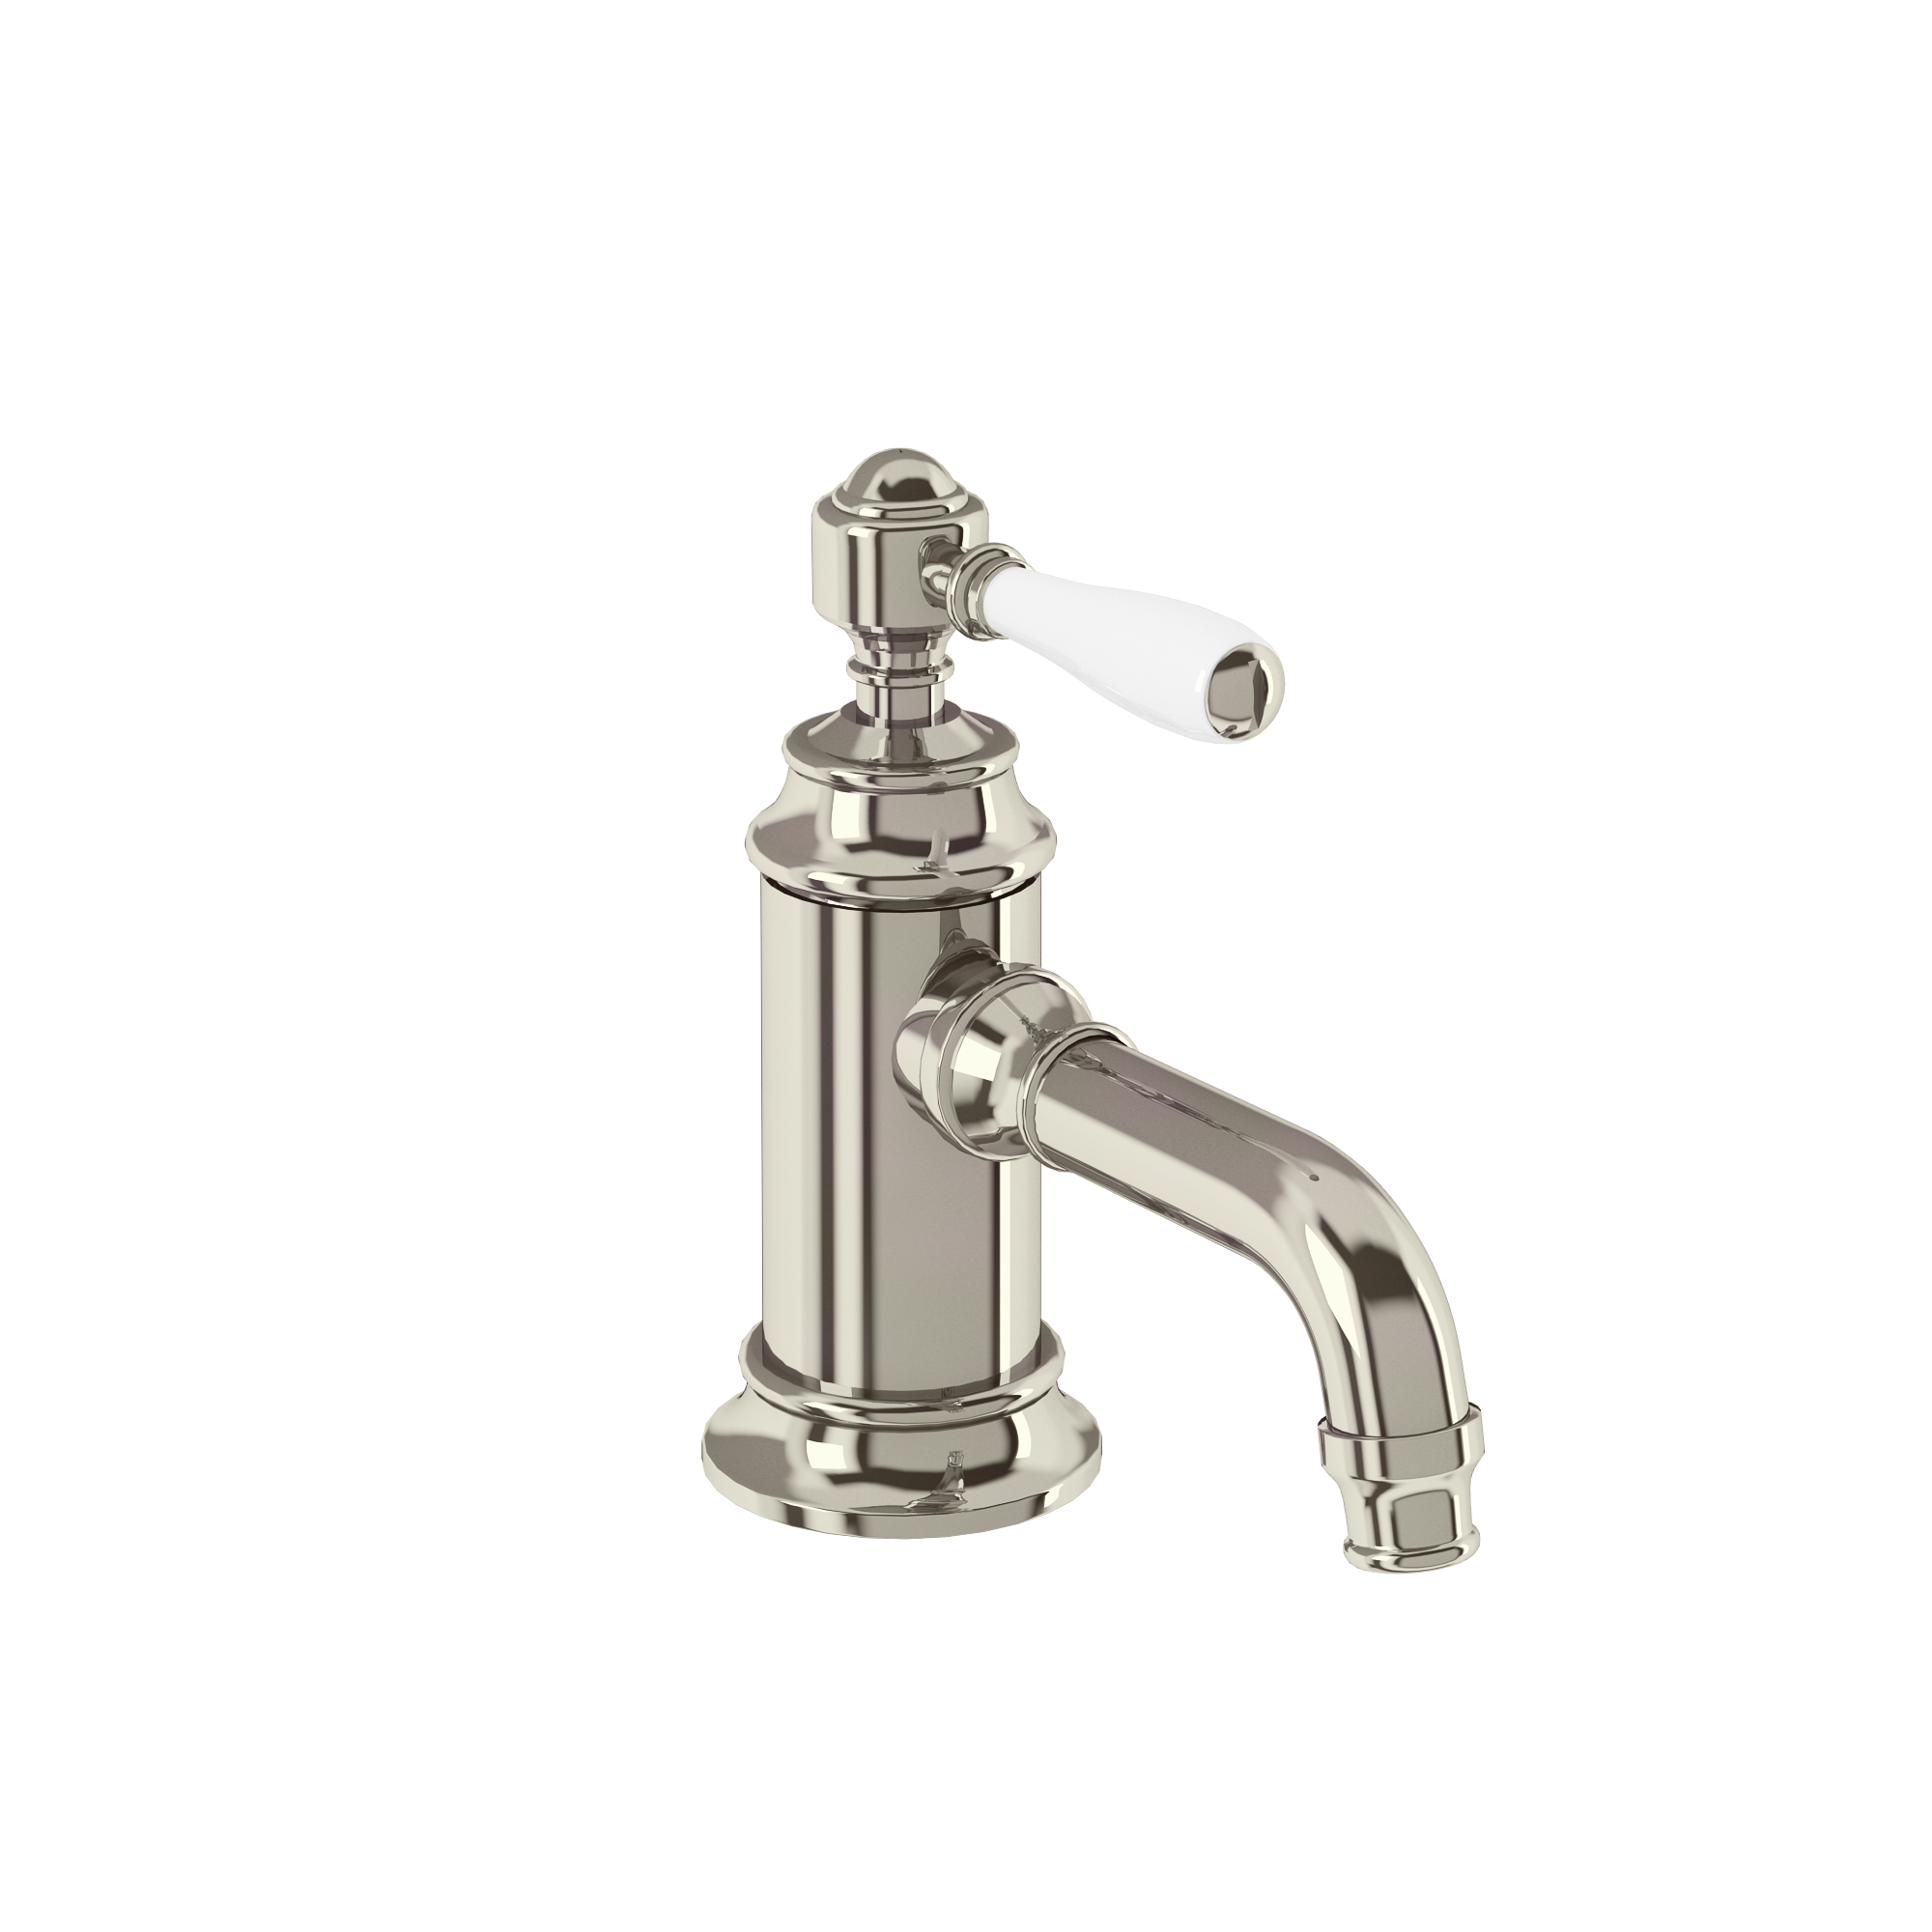 Arcade Single-lever basin mixer without pop up waste - nickel - with ceramic lever